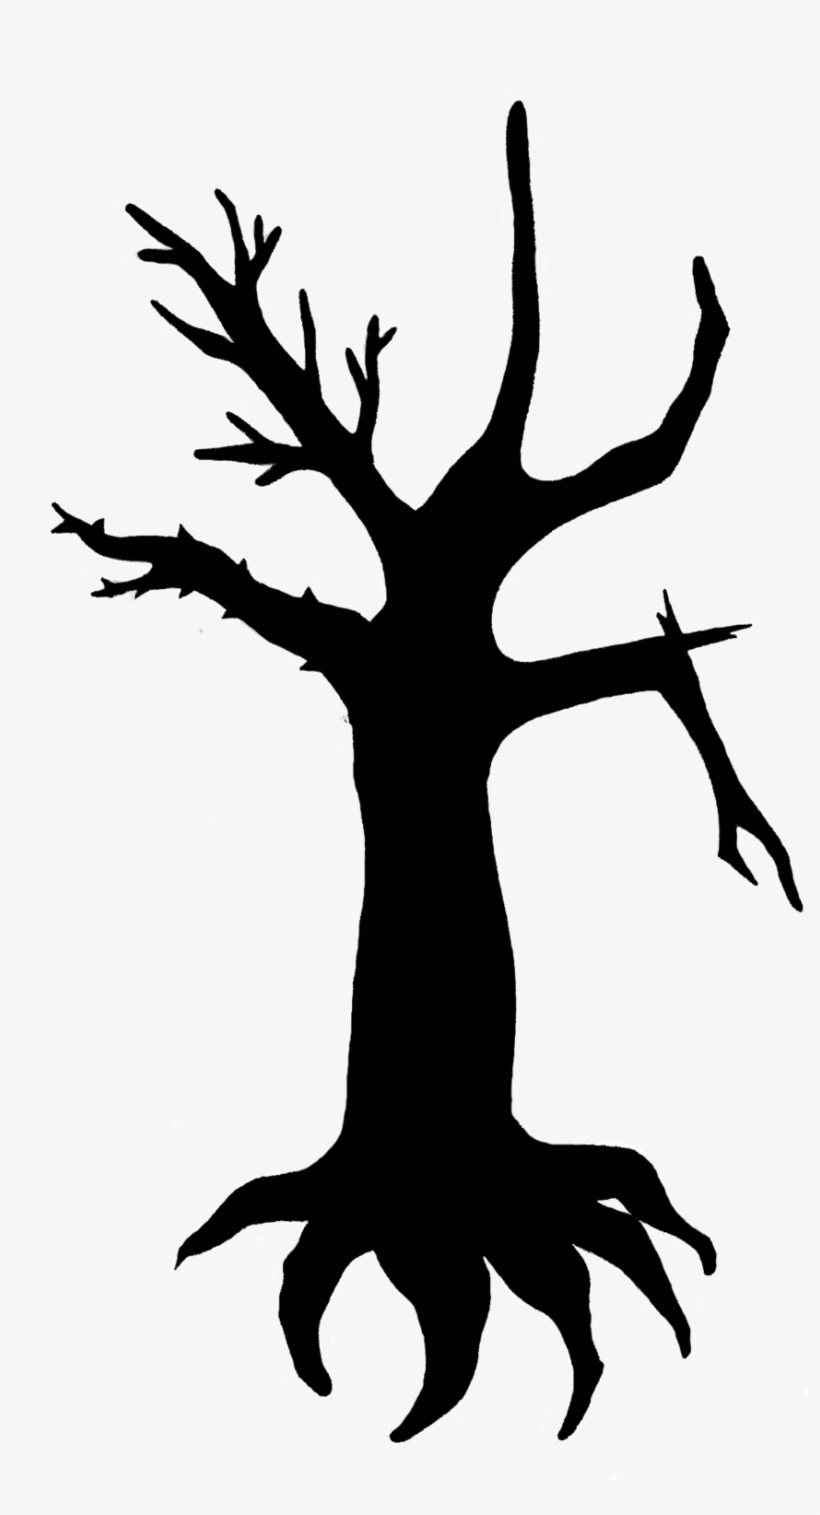 Tree And Roots Silhouette At Getdrawings - Simple Tree Roots Silhouette Png, transparent png #910229